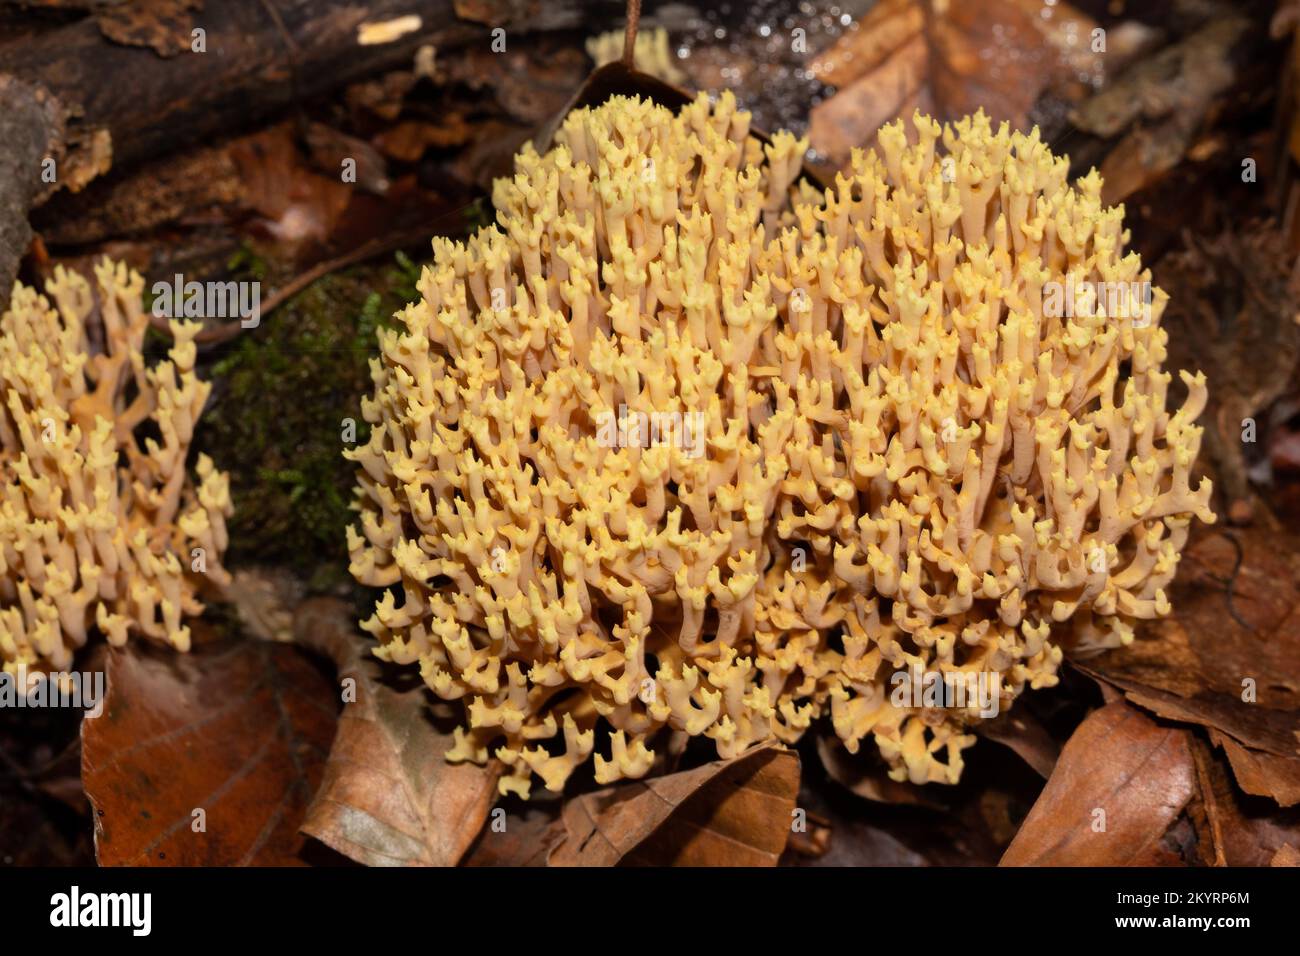 Stiff coral fruiting body with many ochre-yellow branches on tree trunk Stock Photo